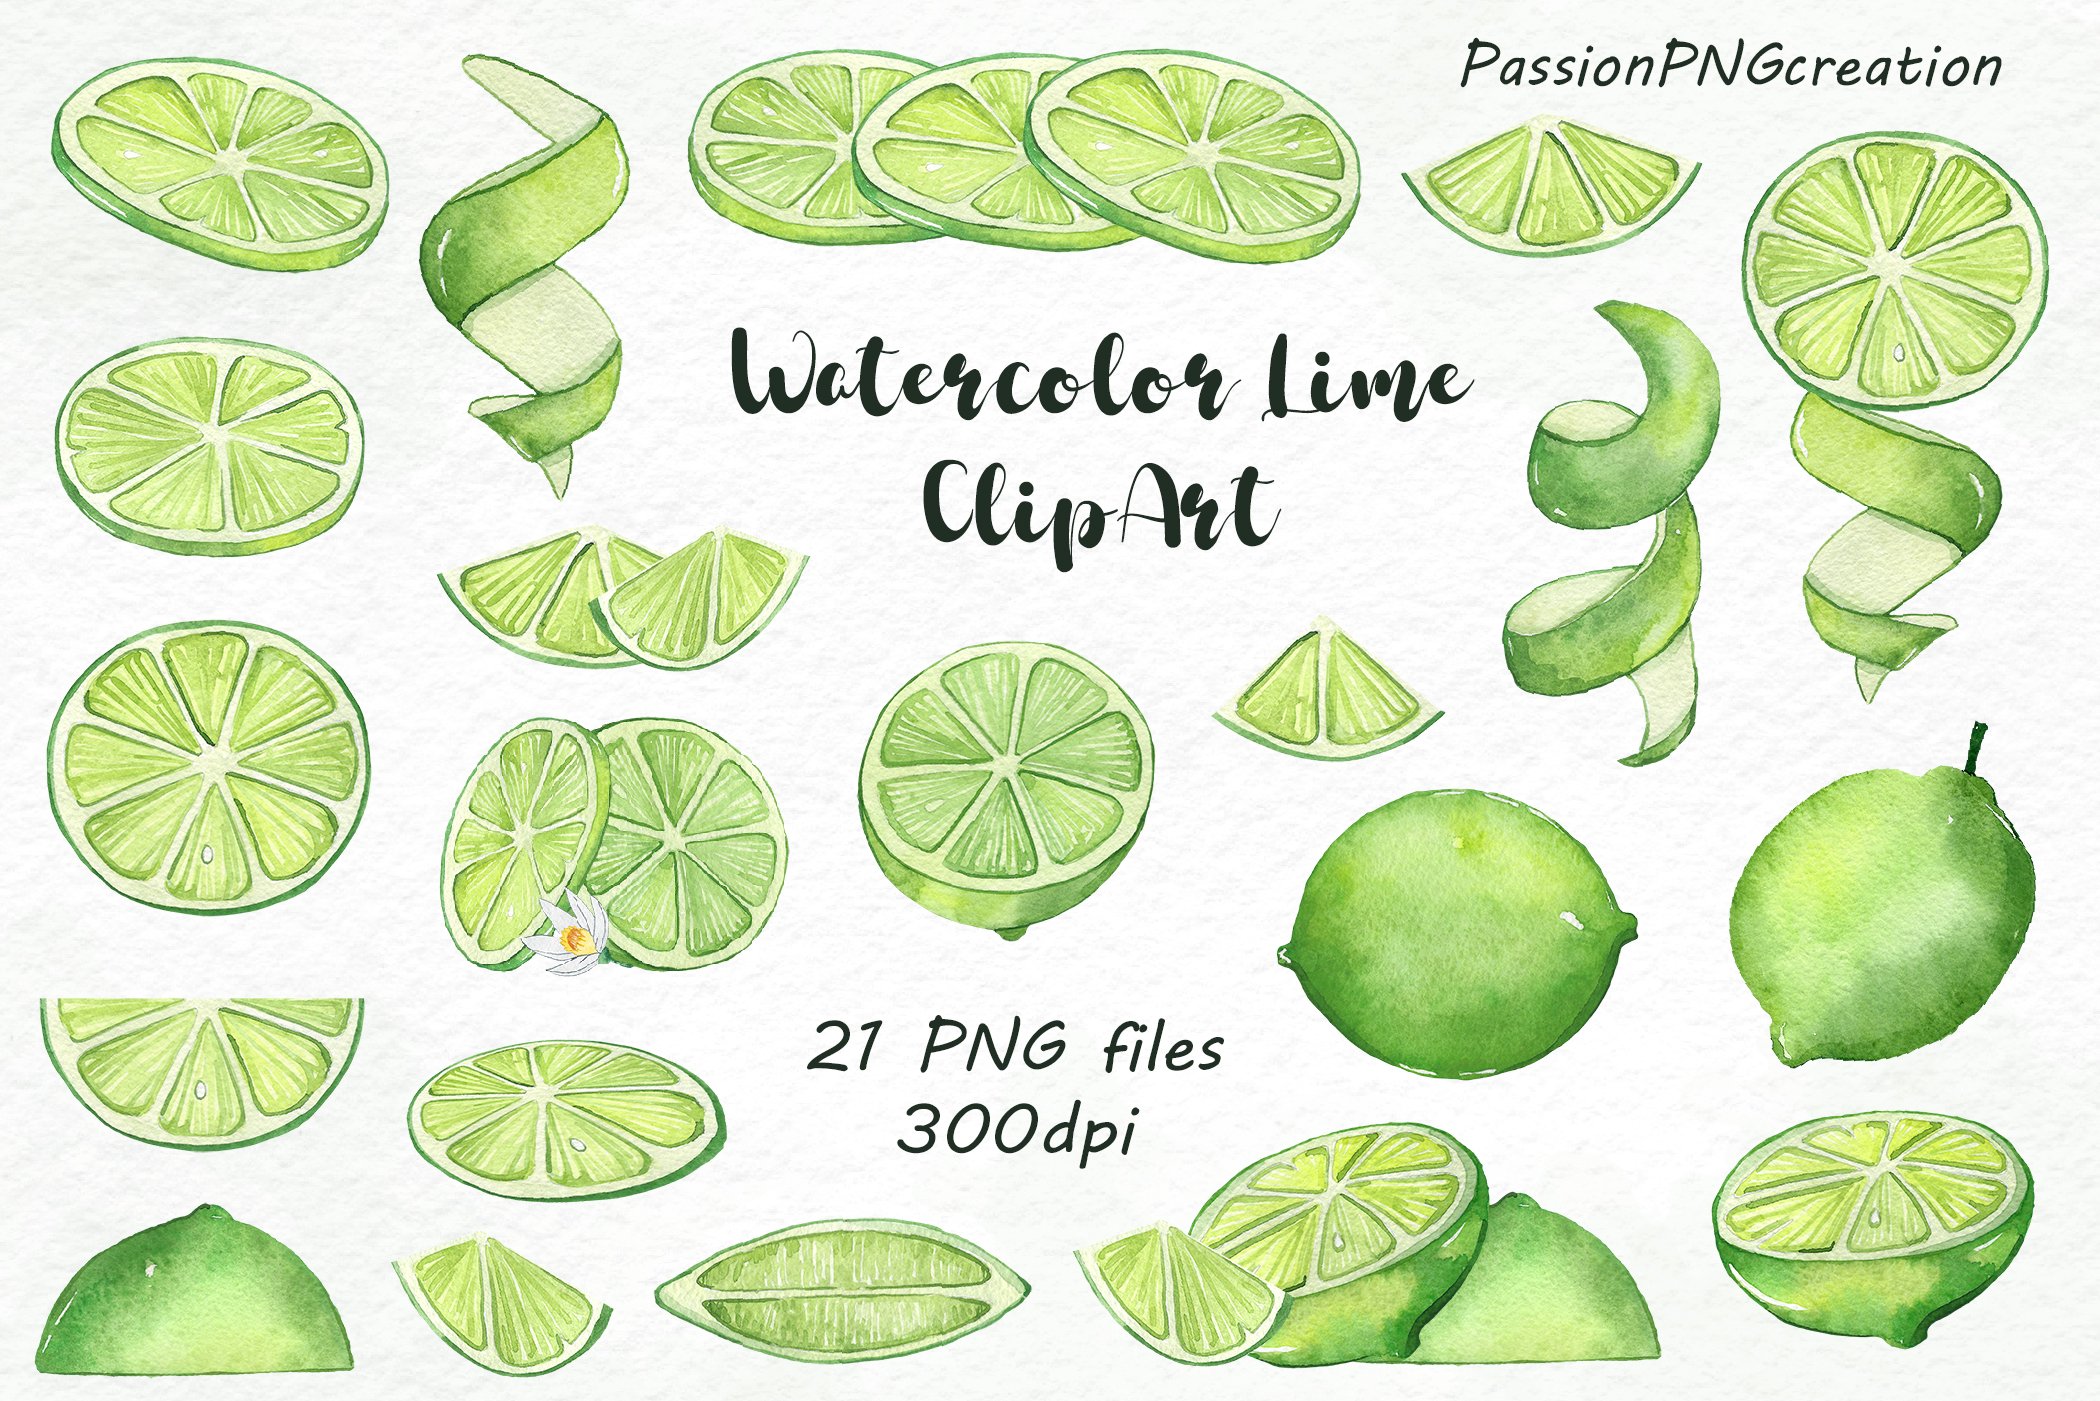 Watercolor Lime Clipart cover image.